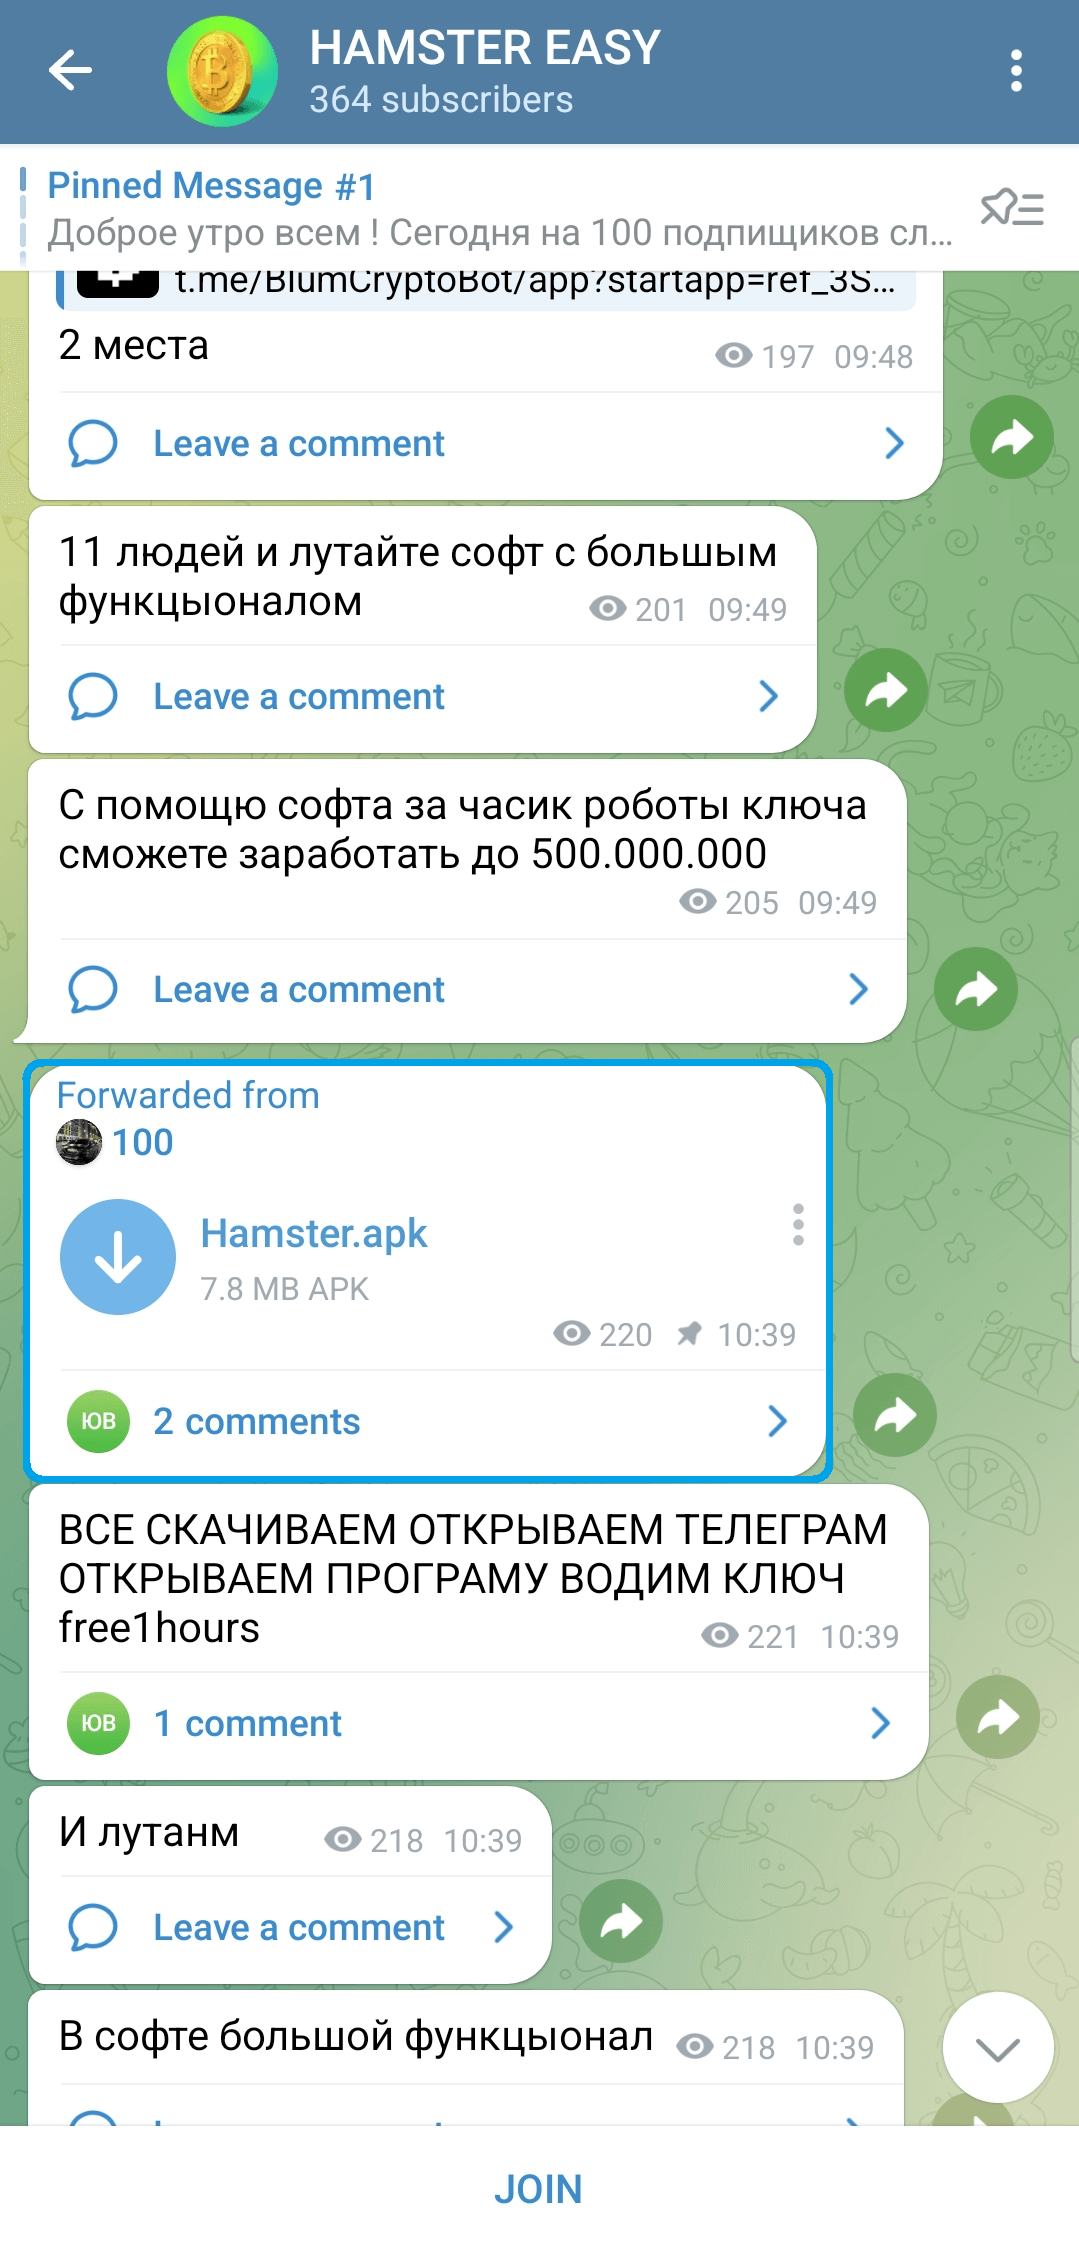 Figure 2. HAMSTER EASY Telegram channel sharing the malicious app